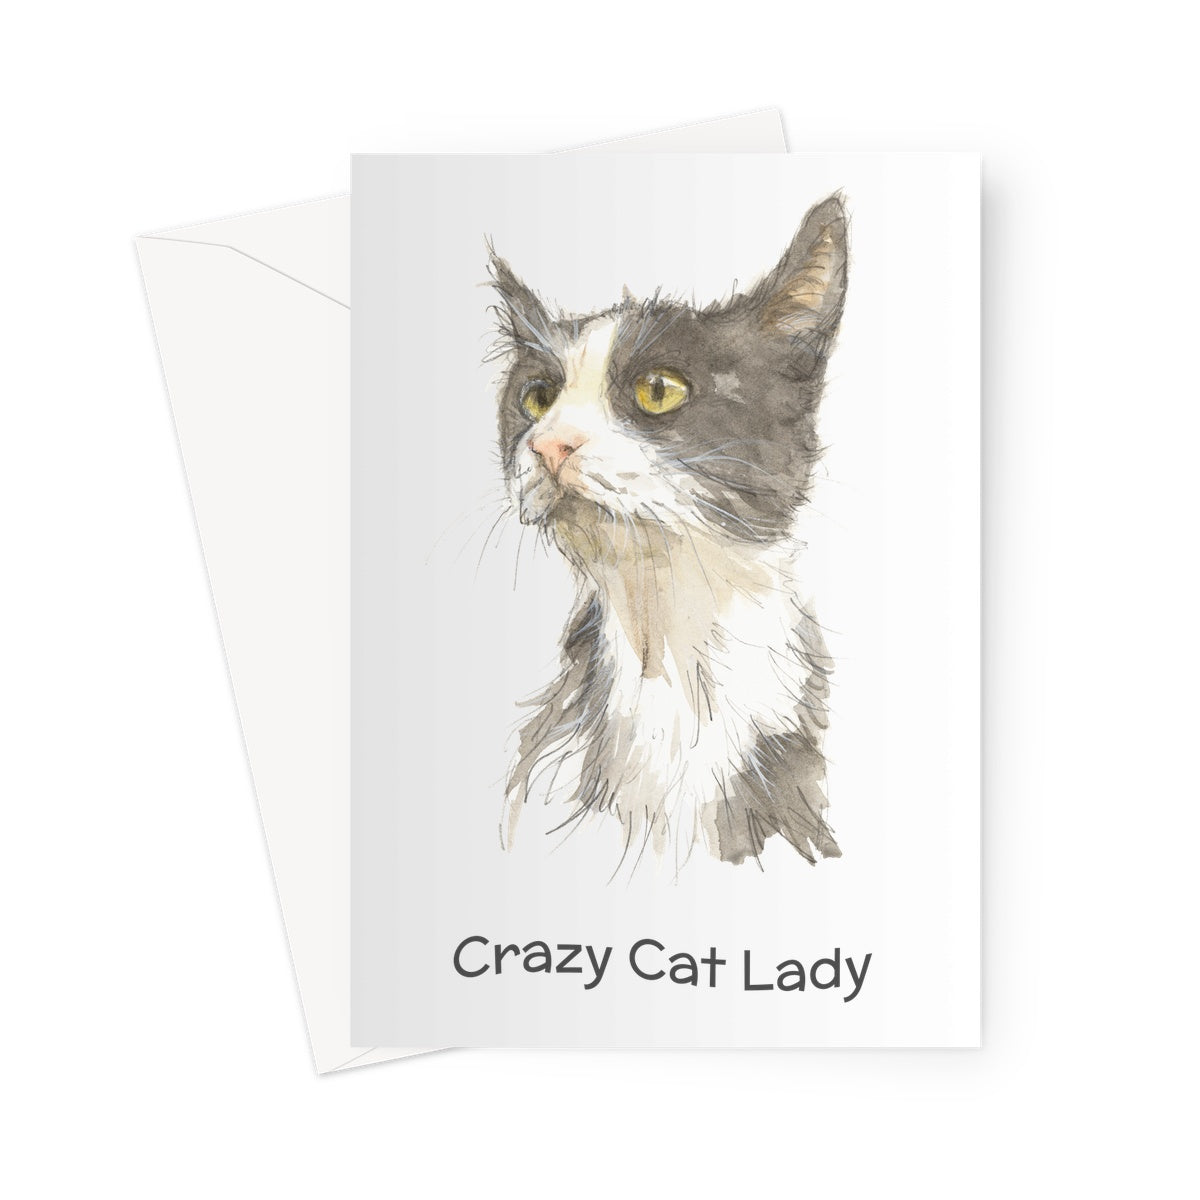 'Crazy Cat Lady' Greetings Card